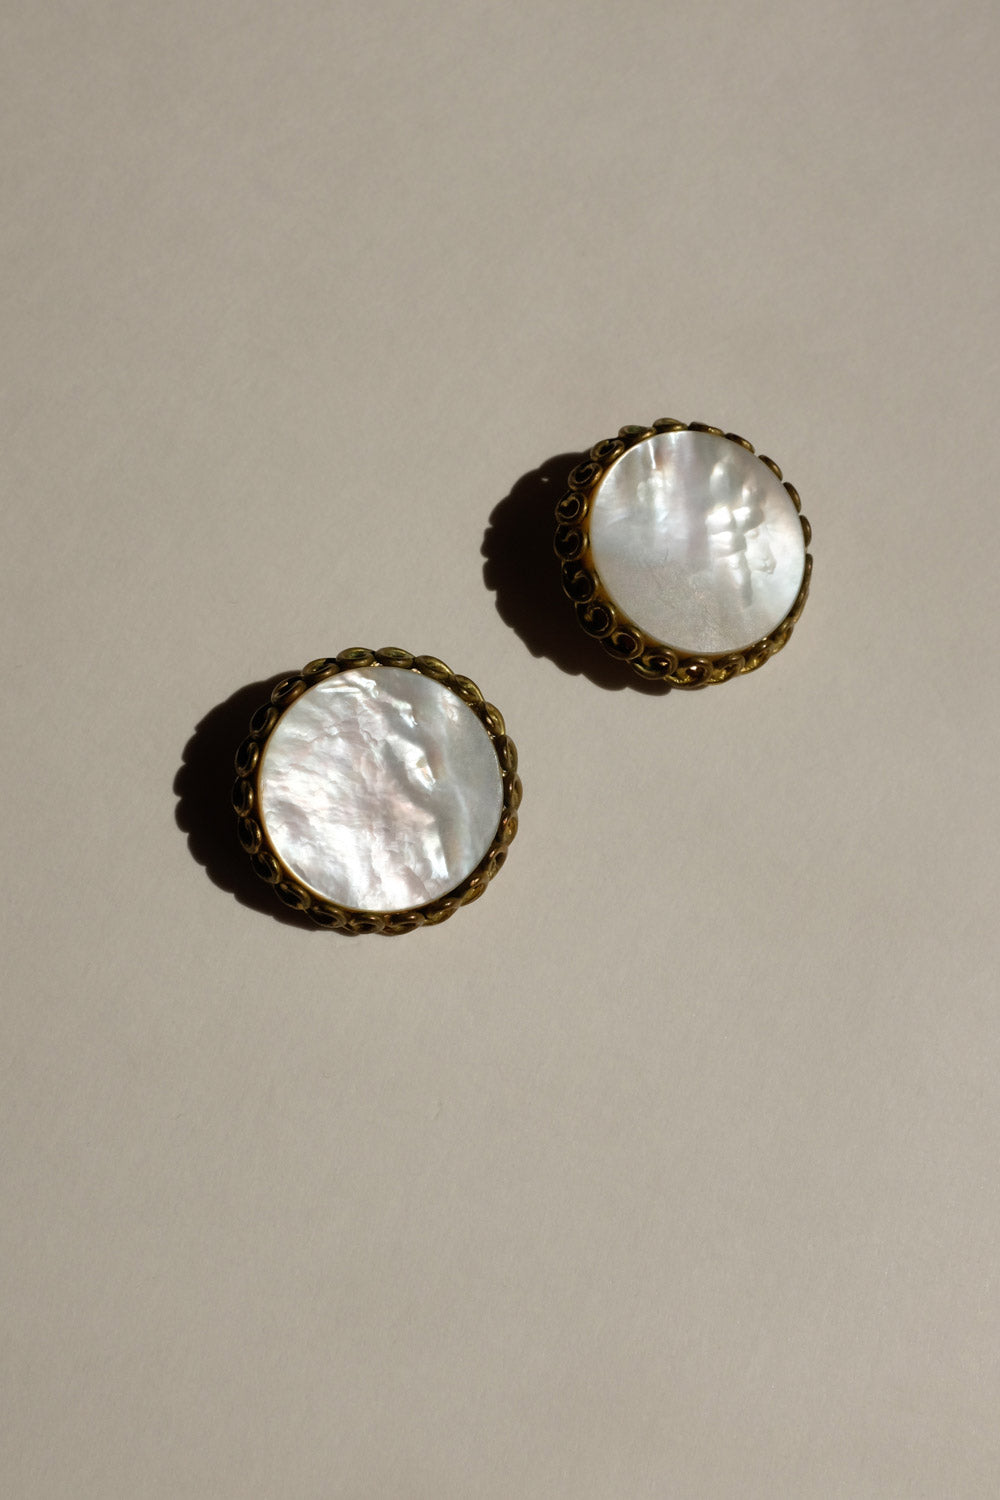 MOTHER OF PEARL VINTAGE GOLD EARRINGS